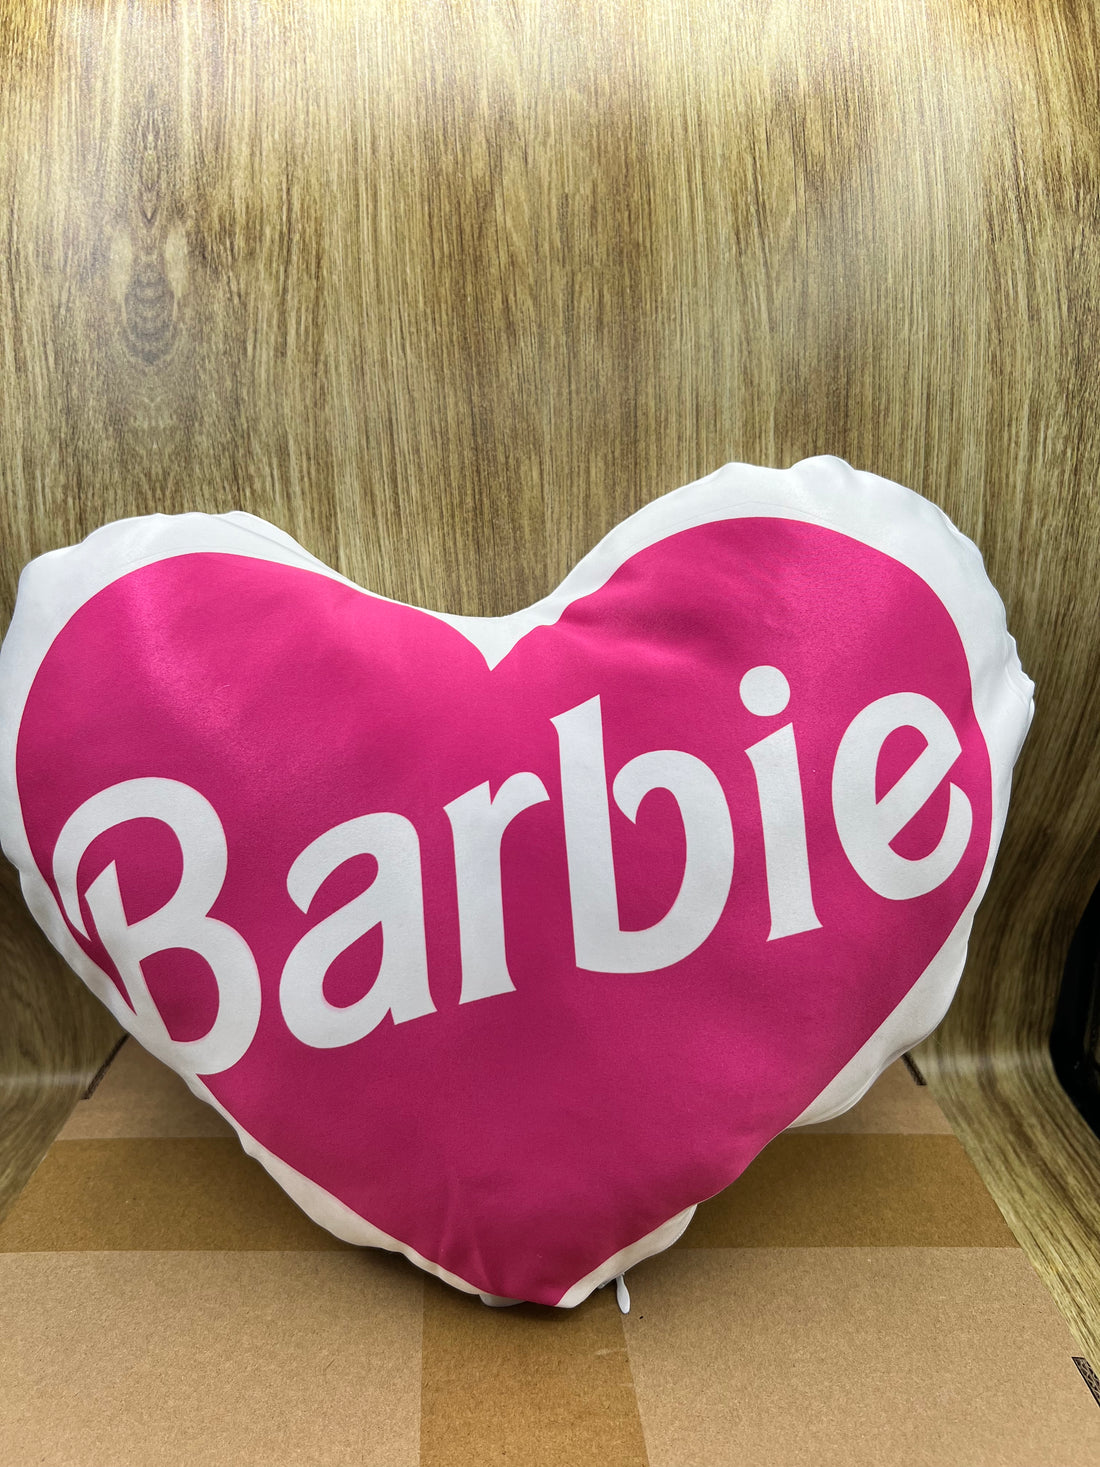 Barbie Heart-Shaped Pillow Style 